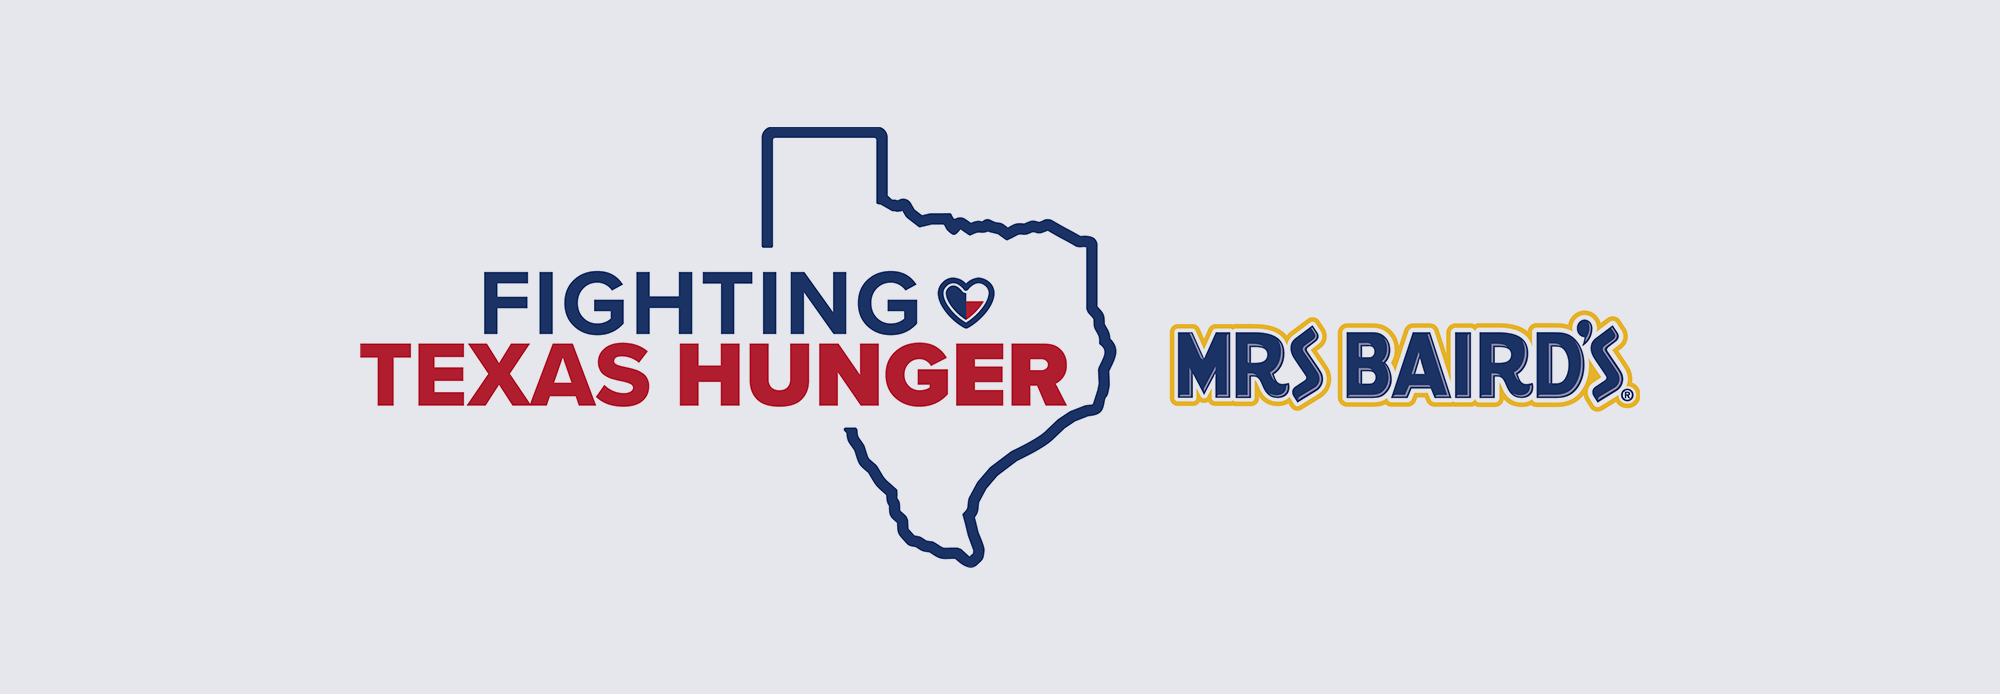 fighting texas hunger